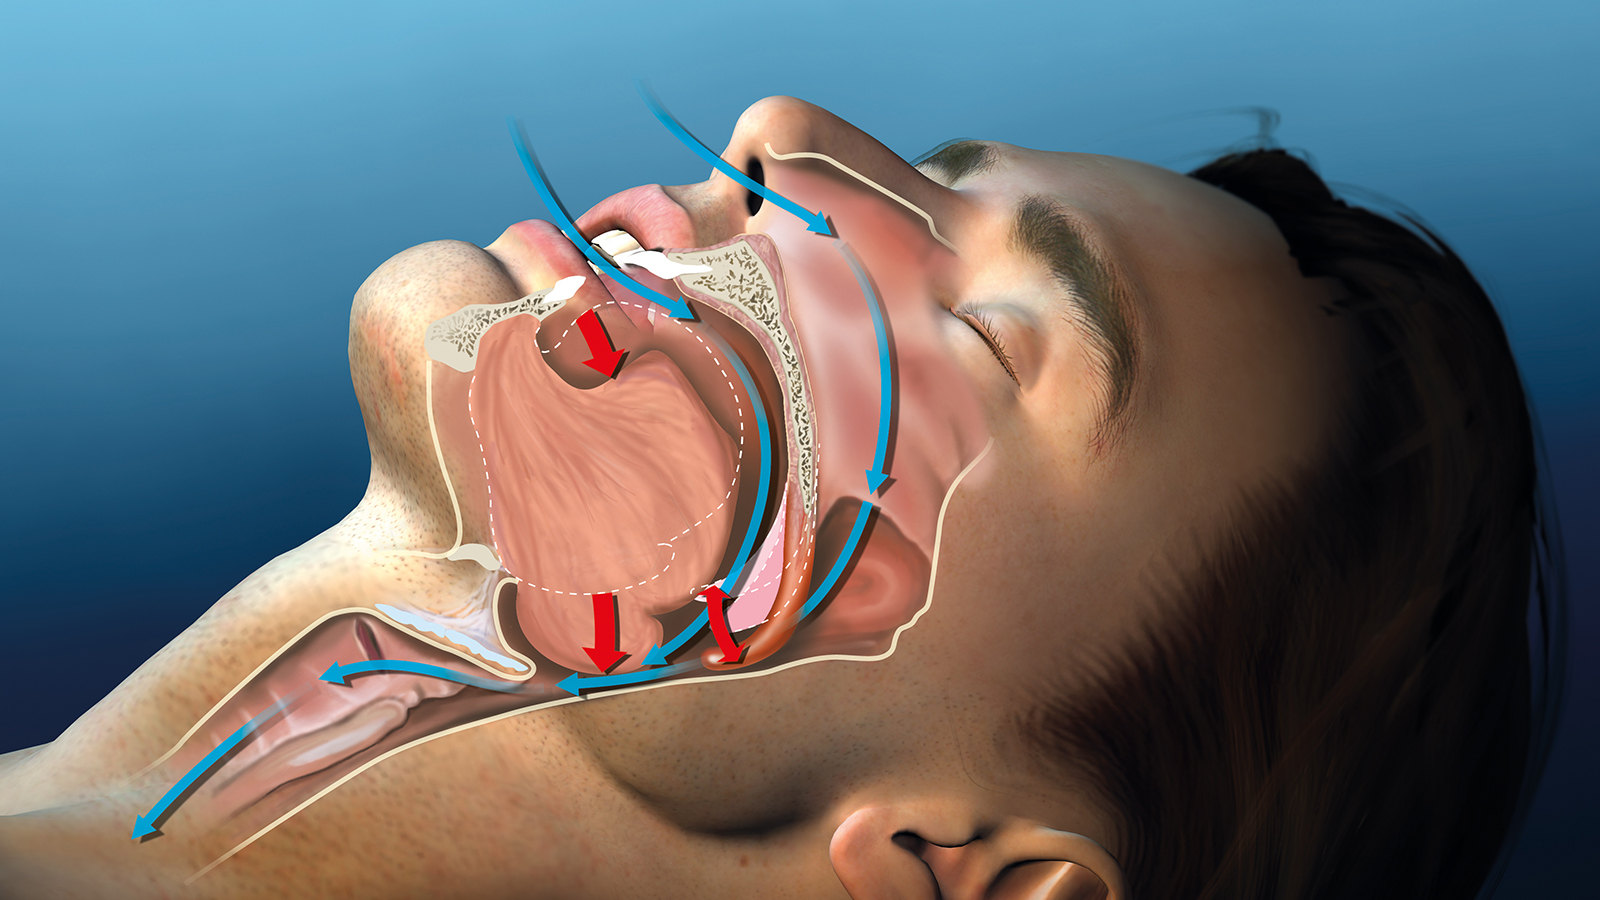 23 Causes of Snoring (and How to Stop) [Video]